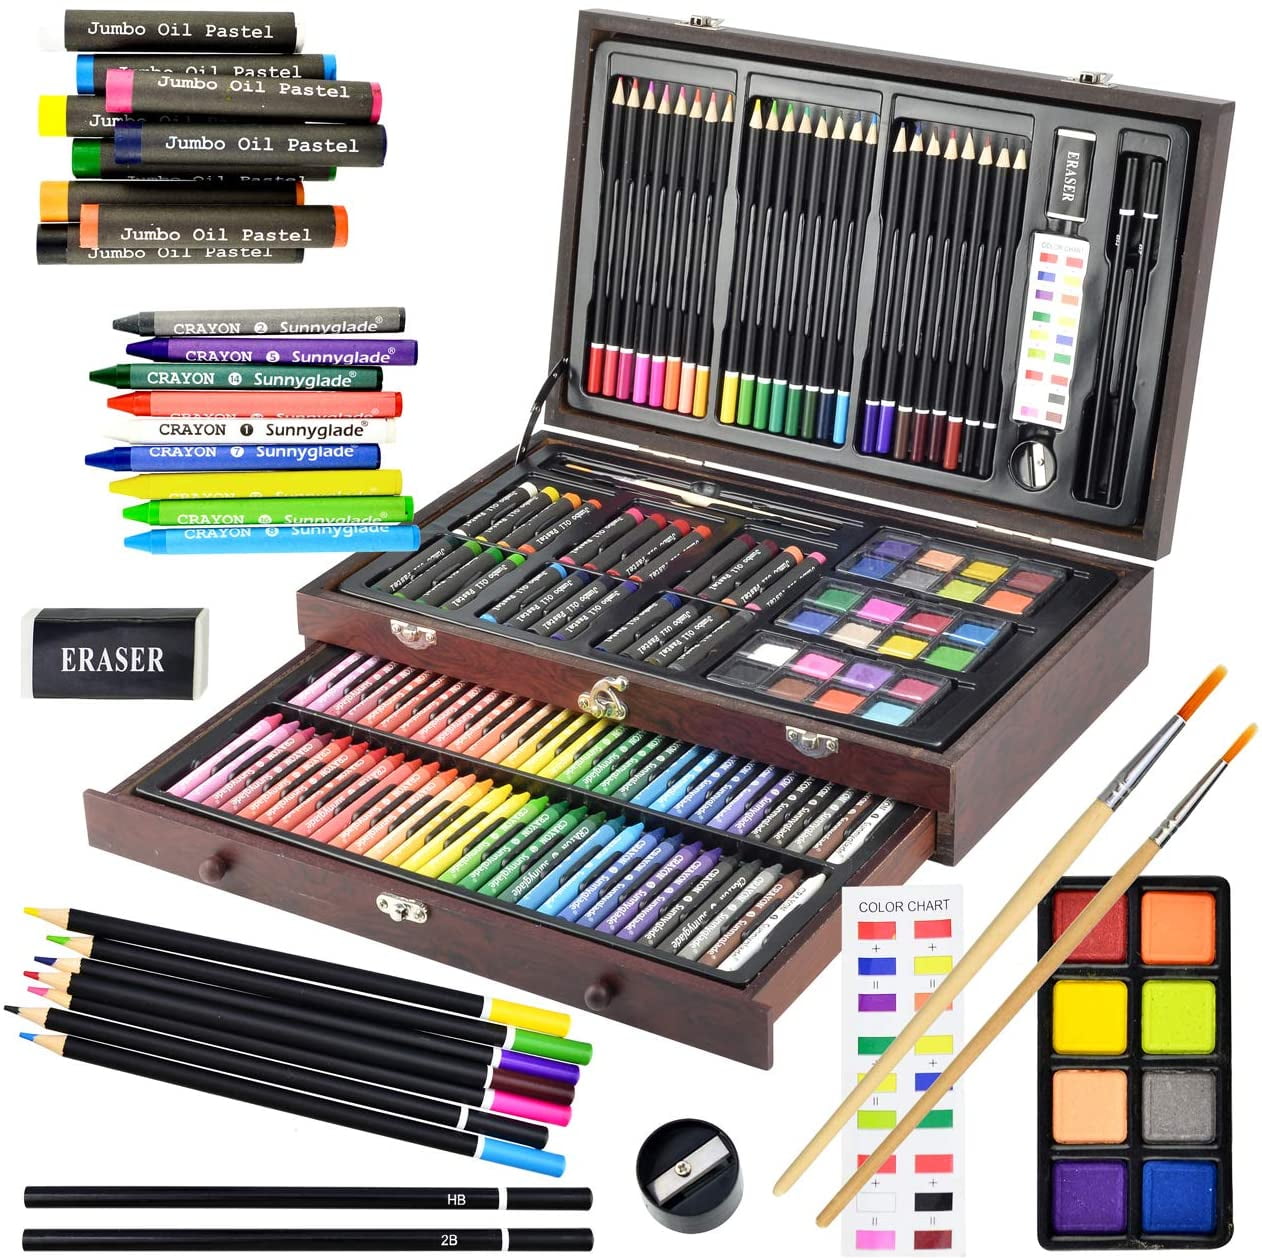 Deluxe Art Set Creative Gift for Teens Beginners Girls Boys Art Supplies Watercolor Cakes Oil Pastels Colored Pencils Wooden Art Set Crafts Kit with Foldable Easel 